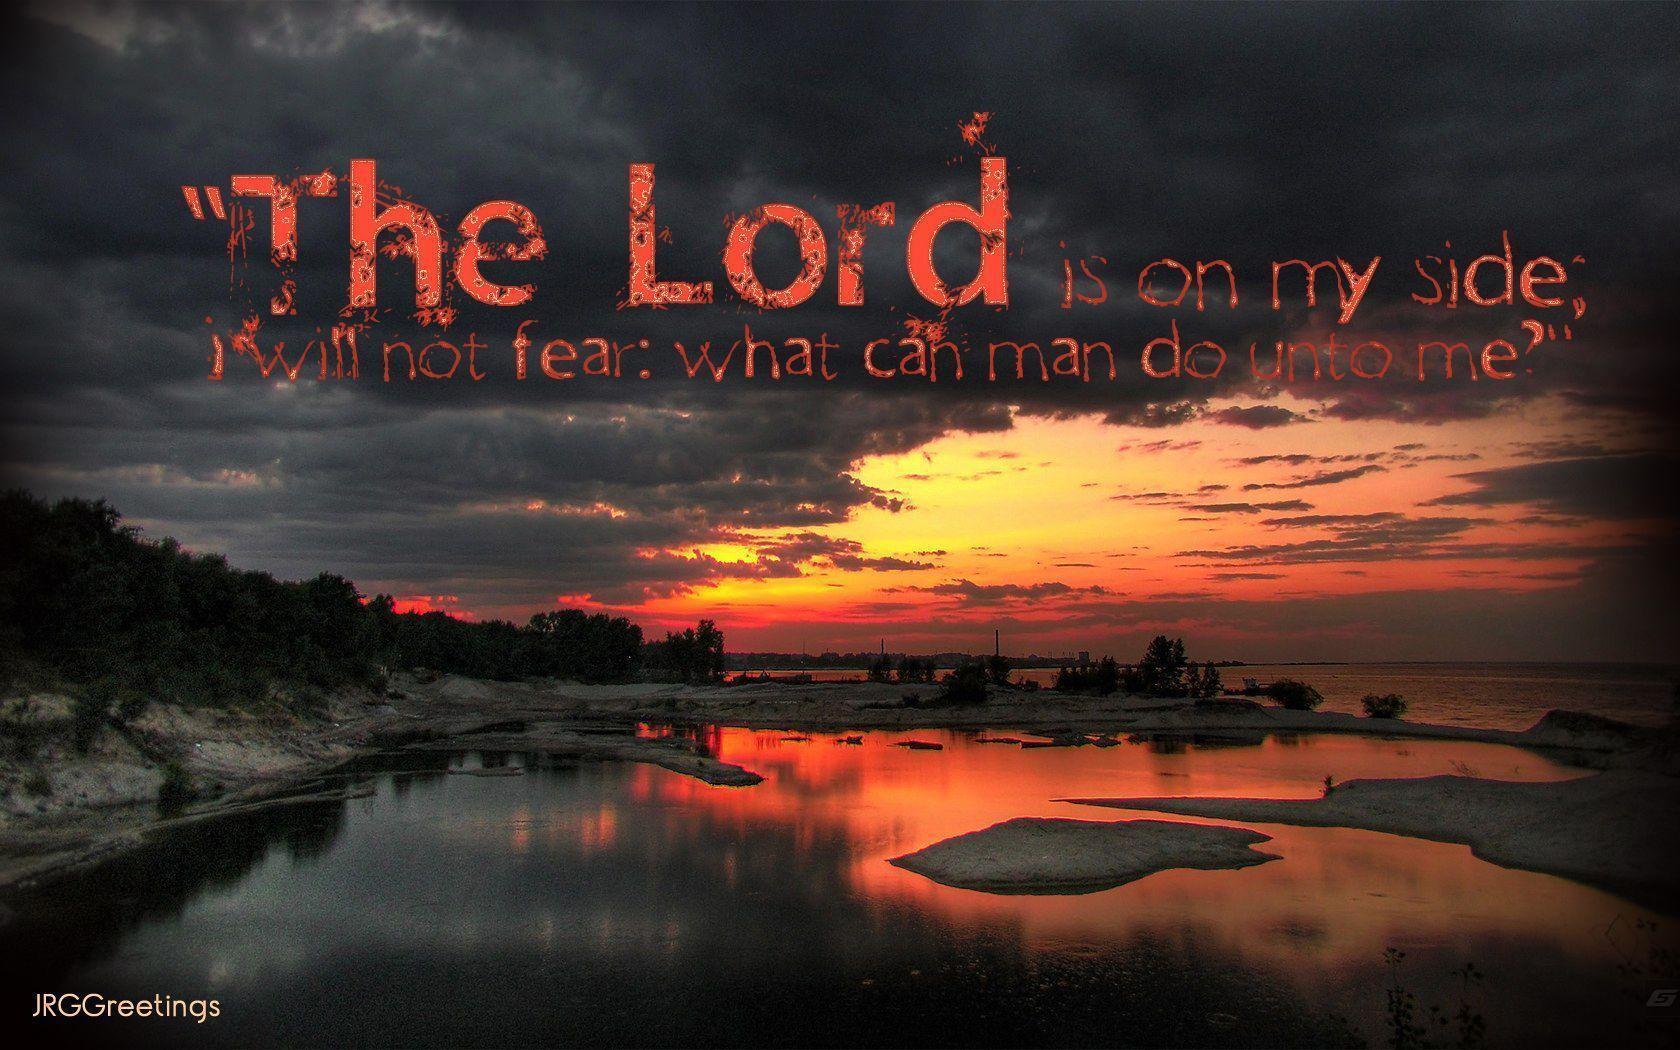 Christian Wallpapers Hd 73202 HD Wallpapers